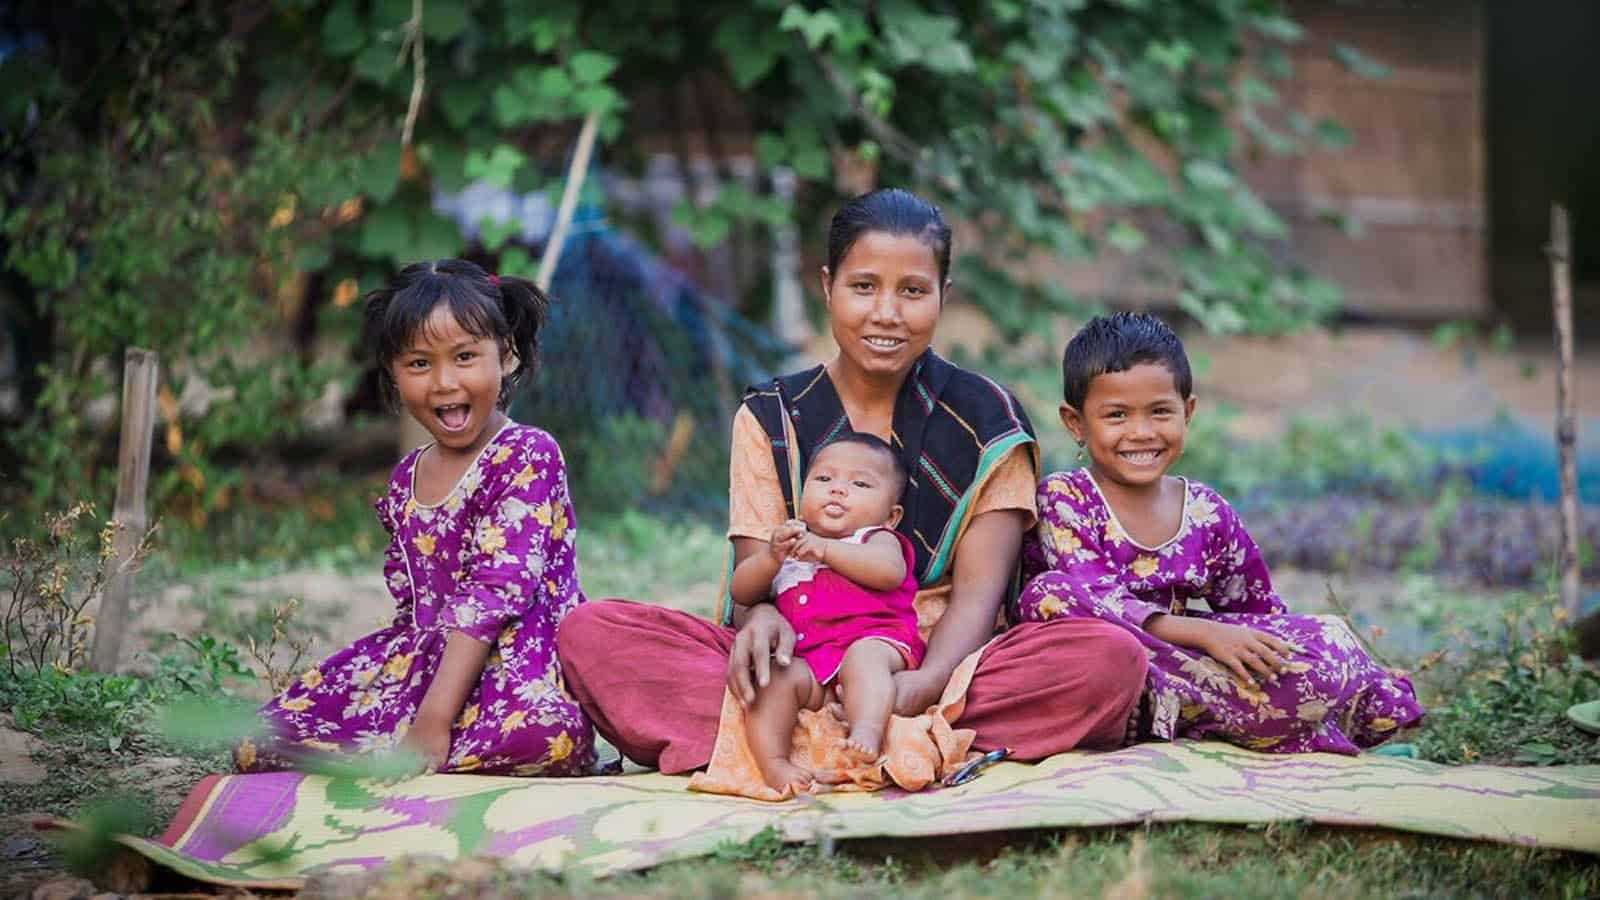 A woman and her three children sit on a mat outdoors. They are smiling. The two older children are wearing matching purple dresses